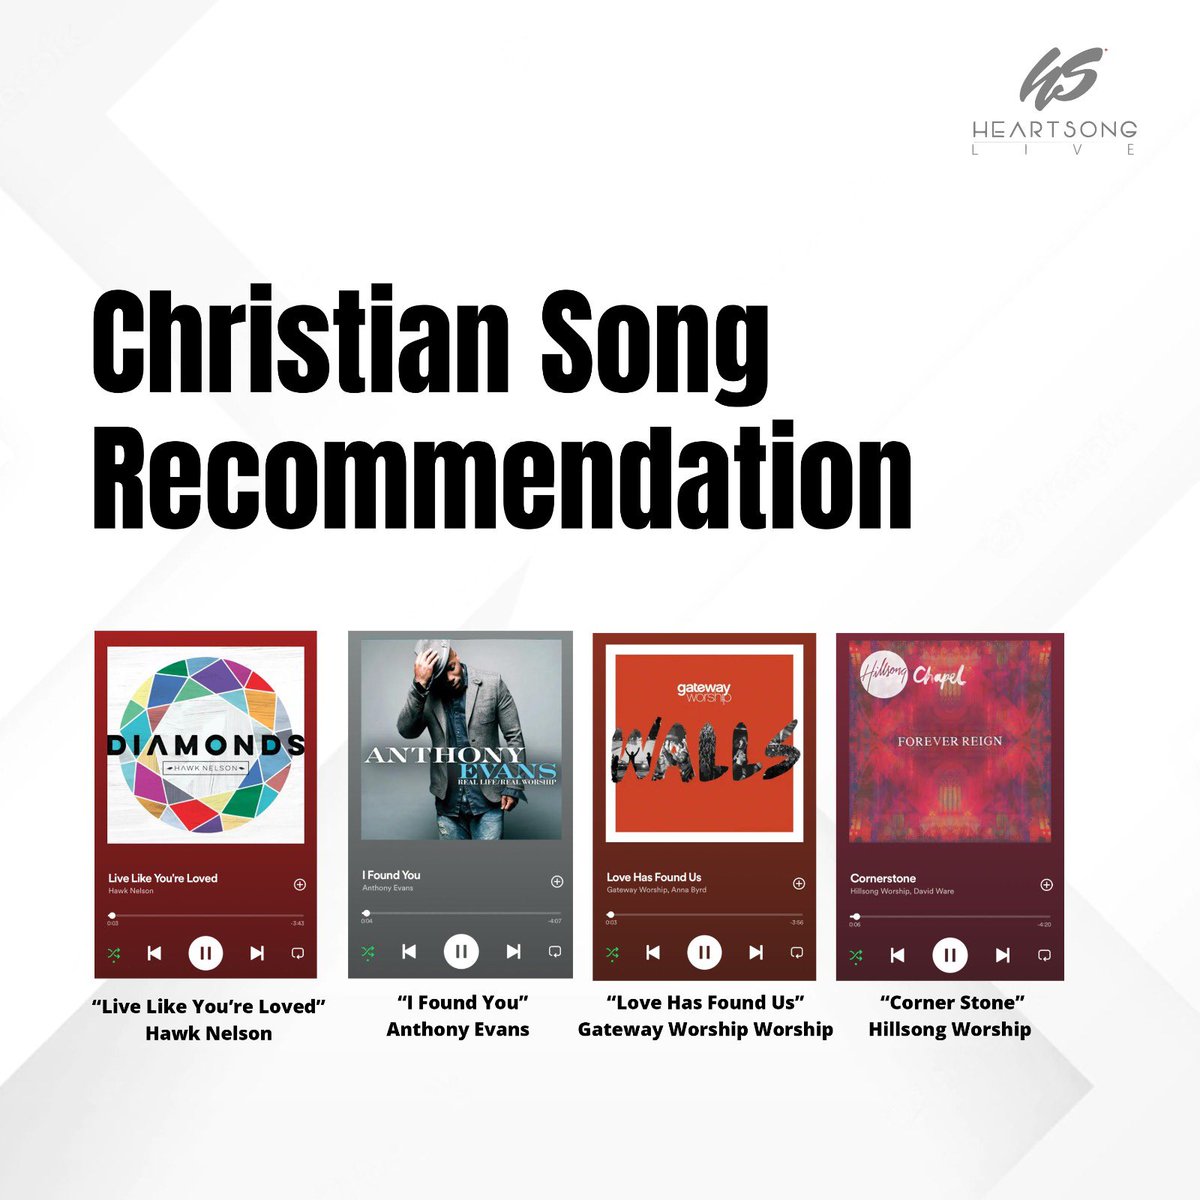 Which of these recommended Christian songs have you listened to yet? 

Tag a friend and recommend one of these to them. 👇🏾😇
.
.
.
.
.
#heartsong #heartsongliveradio #heartsonglive1 #christian #jesus #bible #god #faith #jesuschrist #christianity #church #bibleverse #prayer